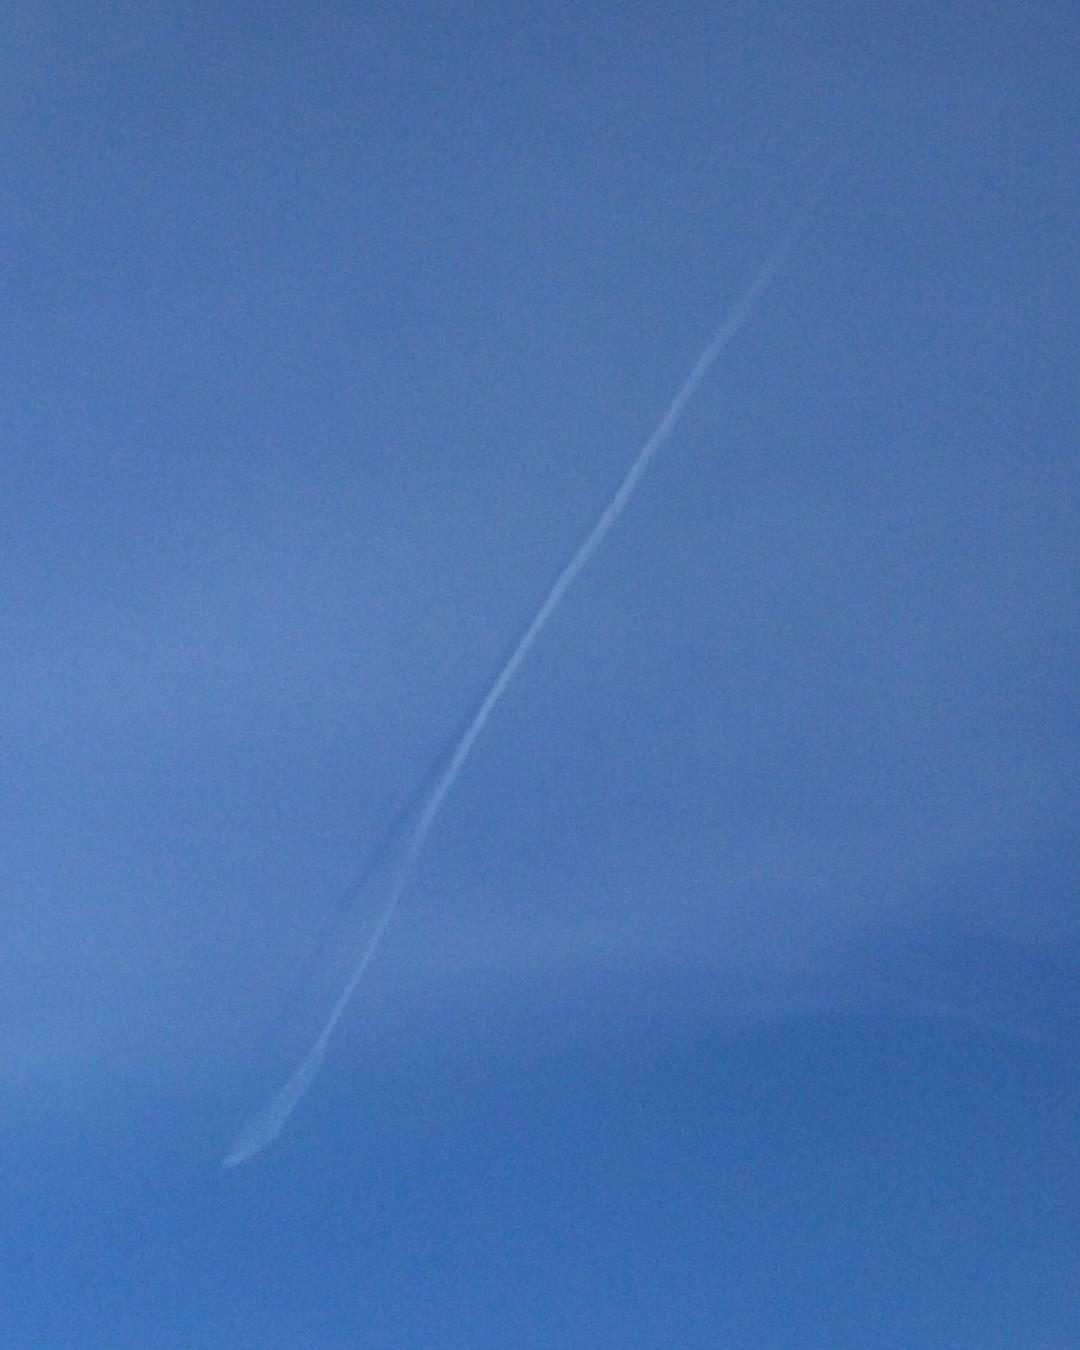 Contrail and shadow